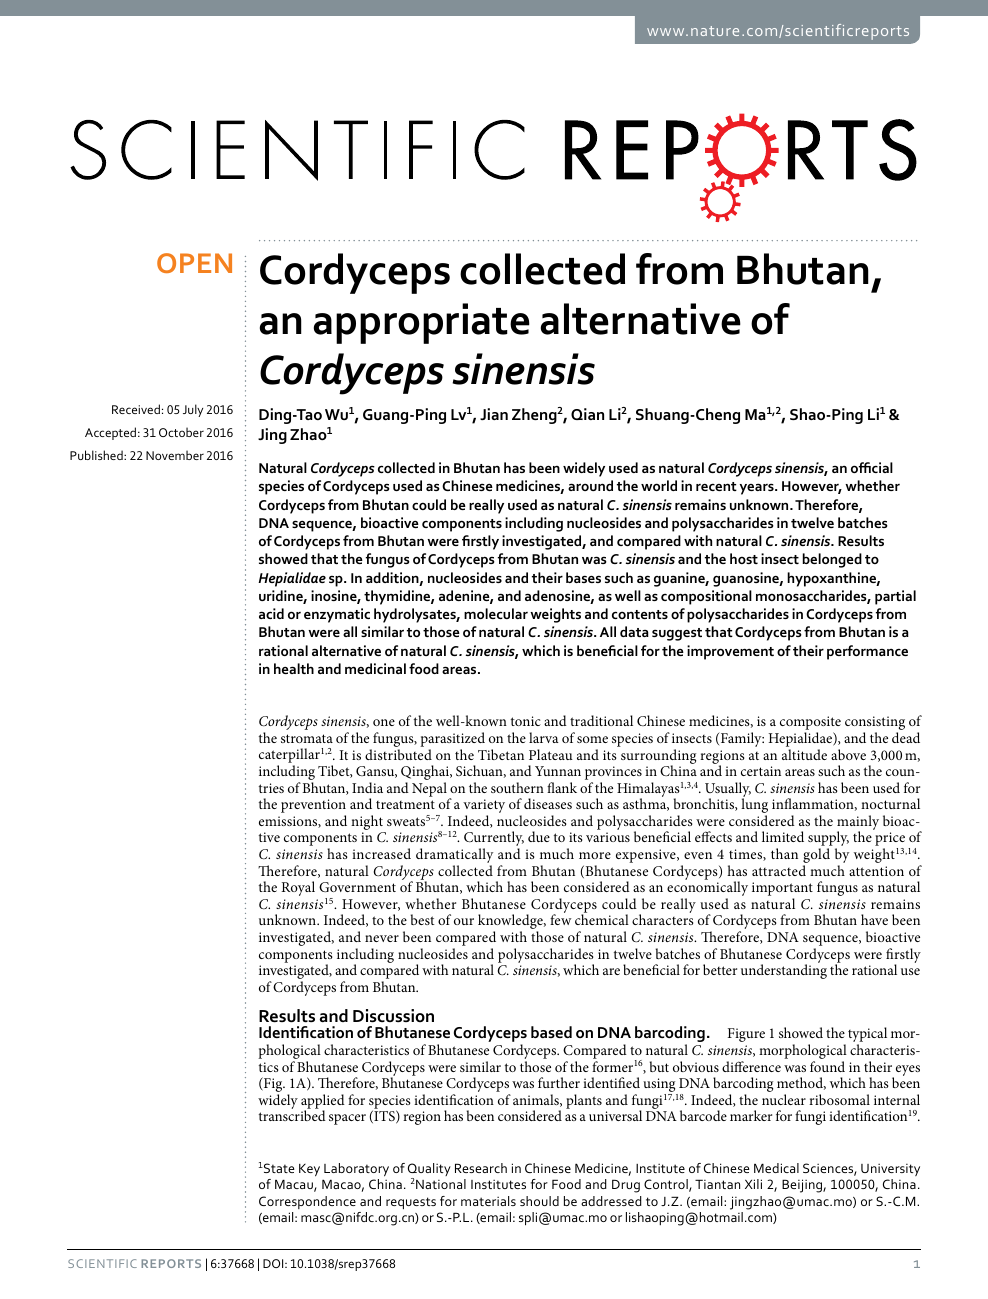 Cordyceps Collected From Bhutan An Appropriate Alternative Of Cordyceps Sinensis Topic Of Research Paper In Biological Sciences Download Scholarly Article Pdf And Read For Free On Cyberleninka Open Science Hub